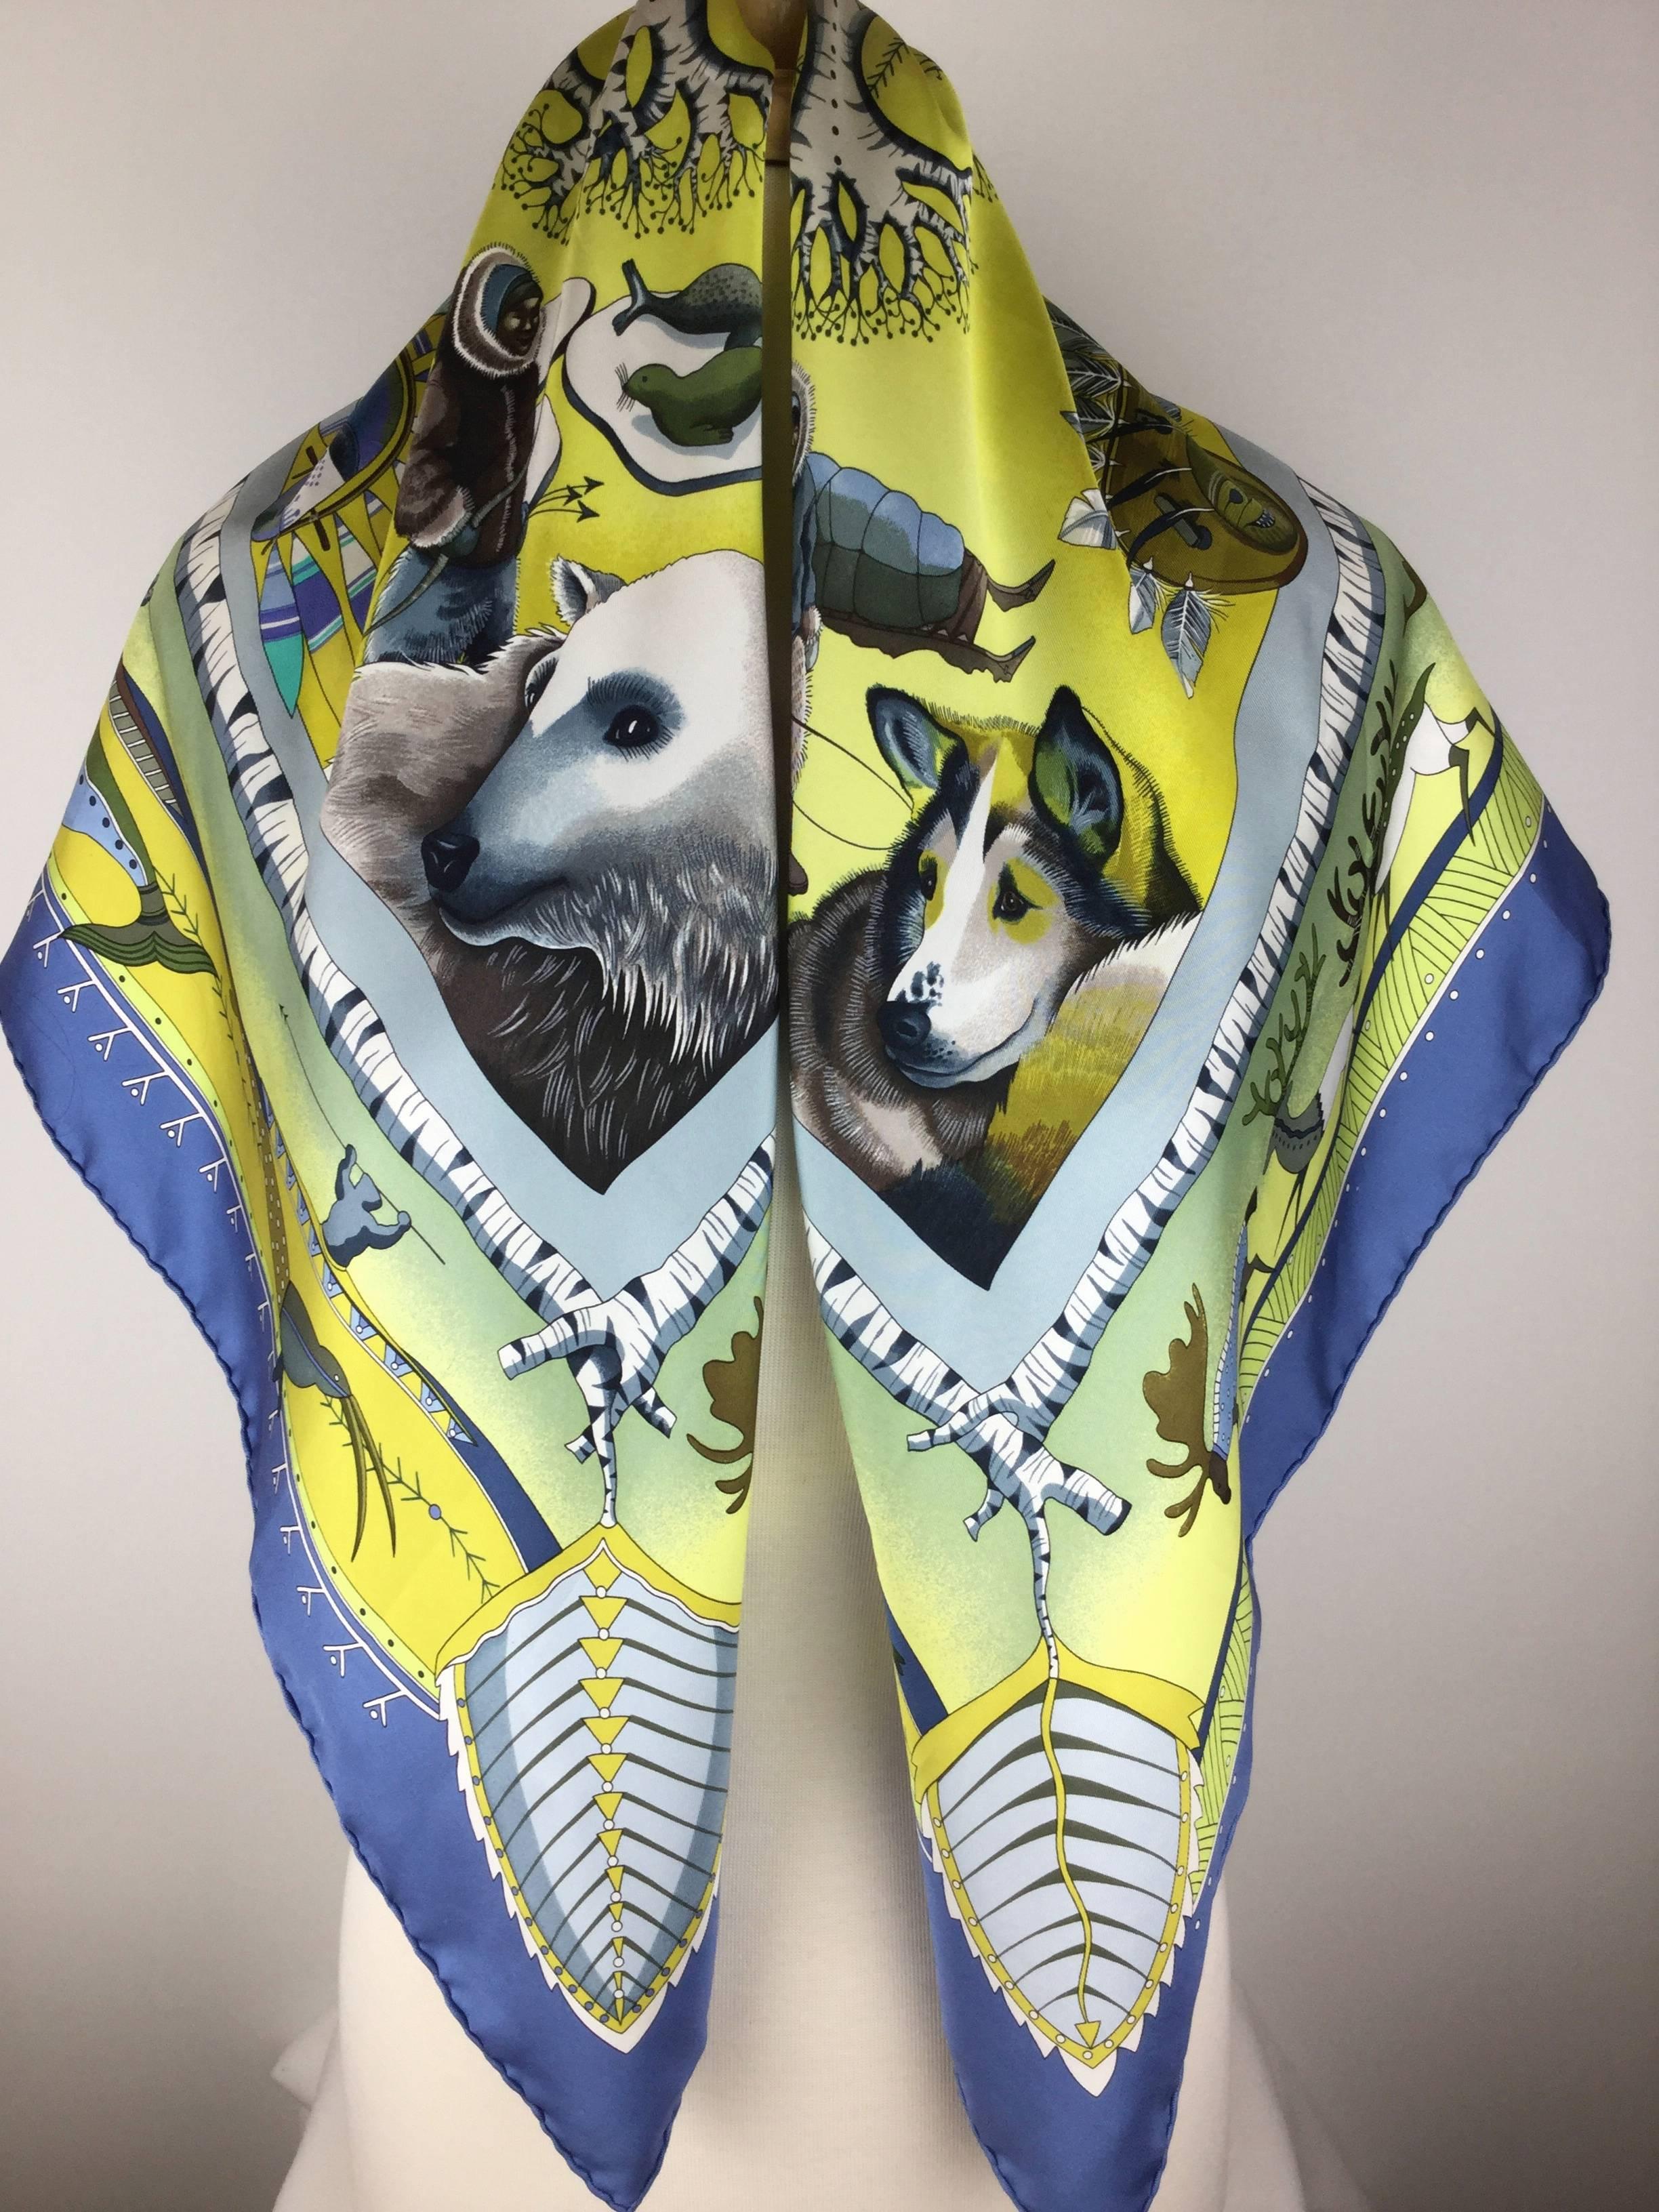 
This is truly an amazing scarf/shawl titled 